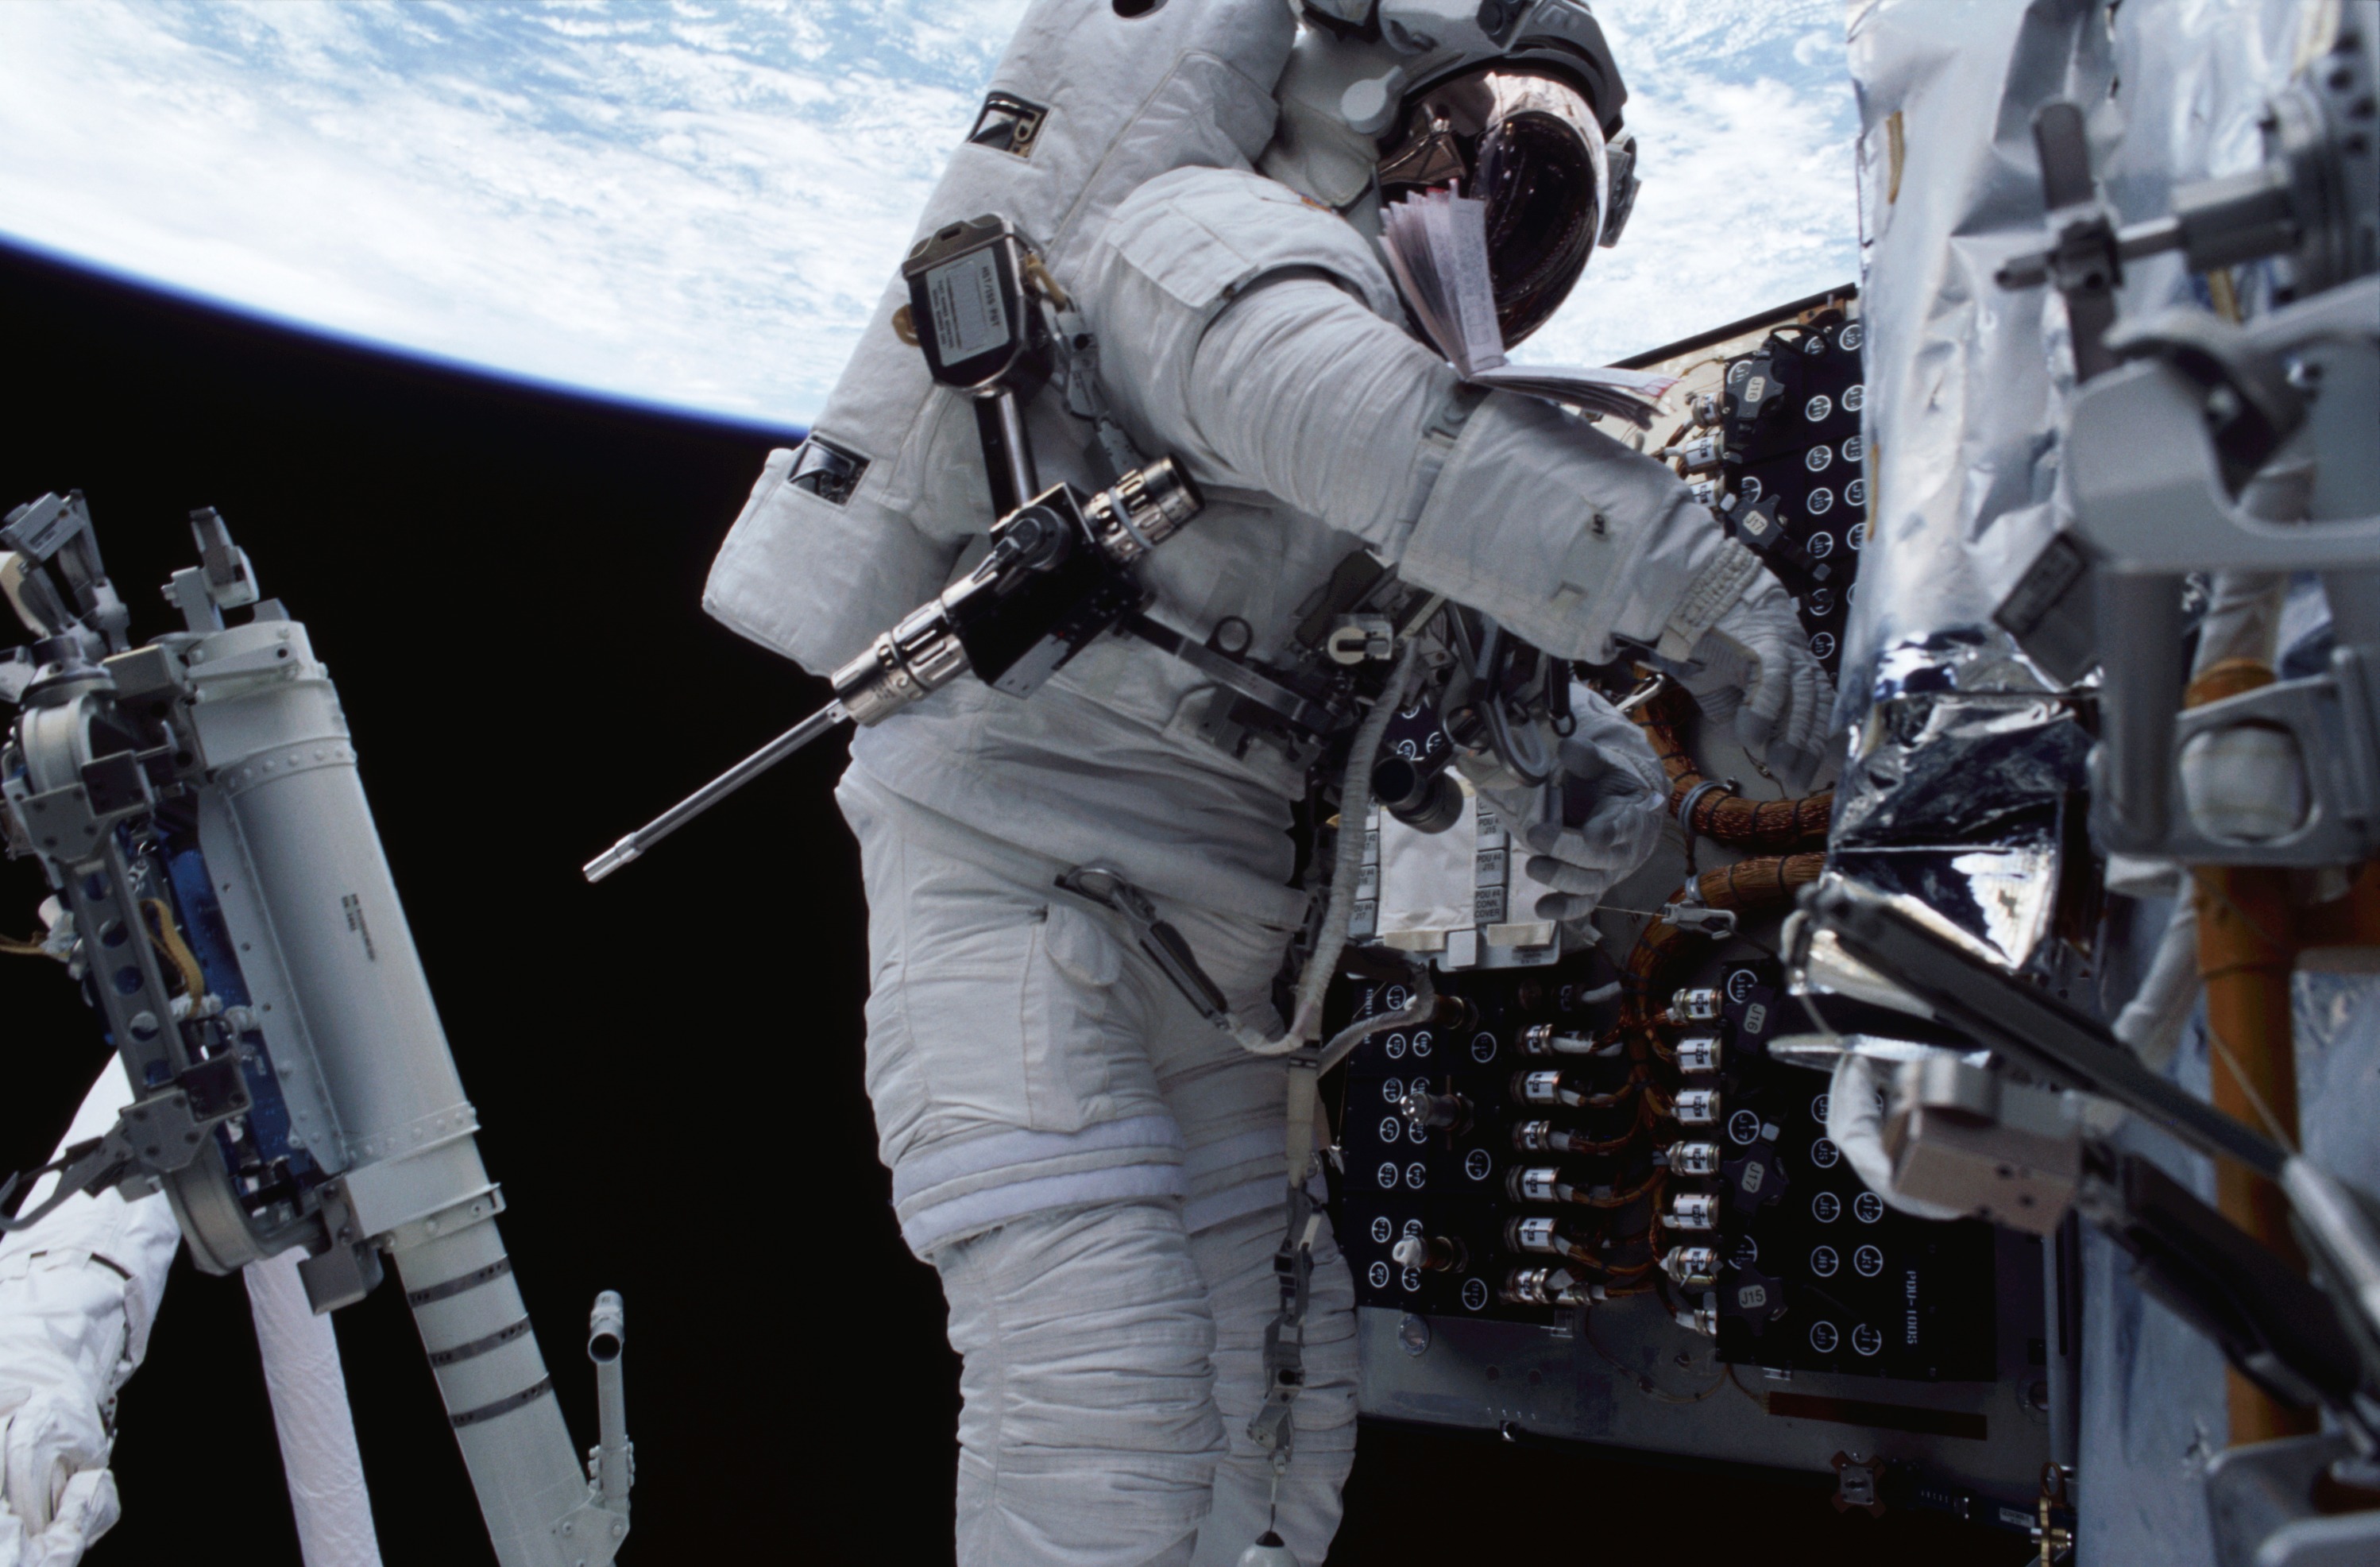 An astronaut in a spacesuit has a long tool that resembles a drill attached to his belt as he works on the Hubble space Telescope. Earth is visible in the background.